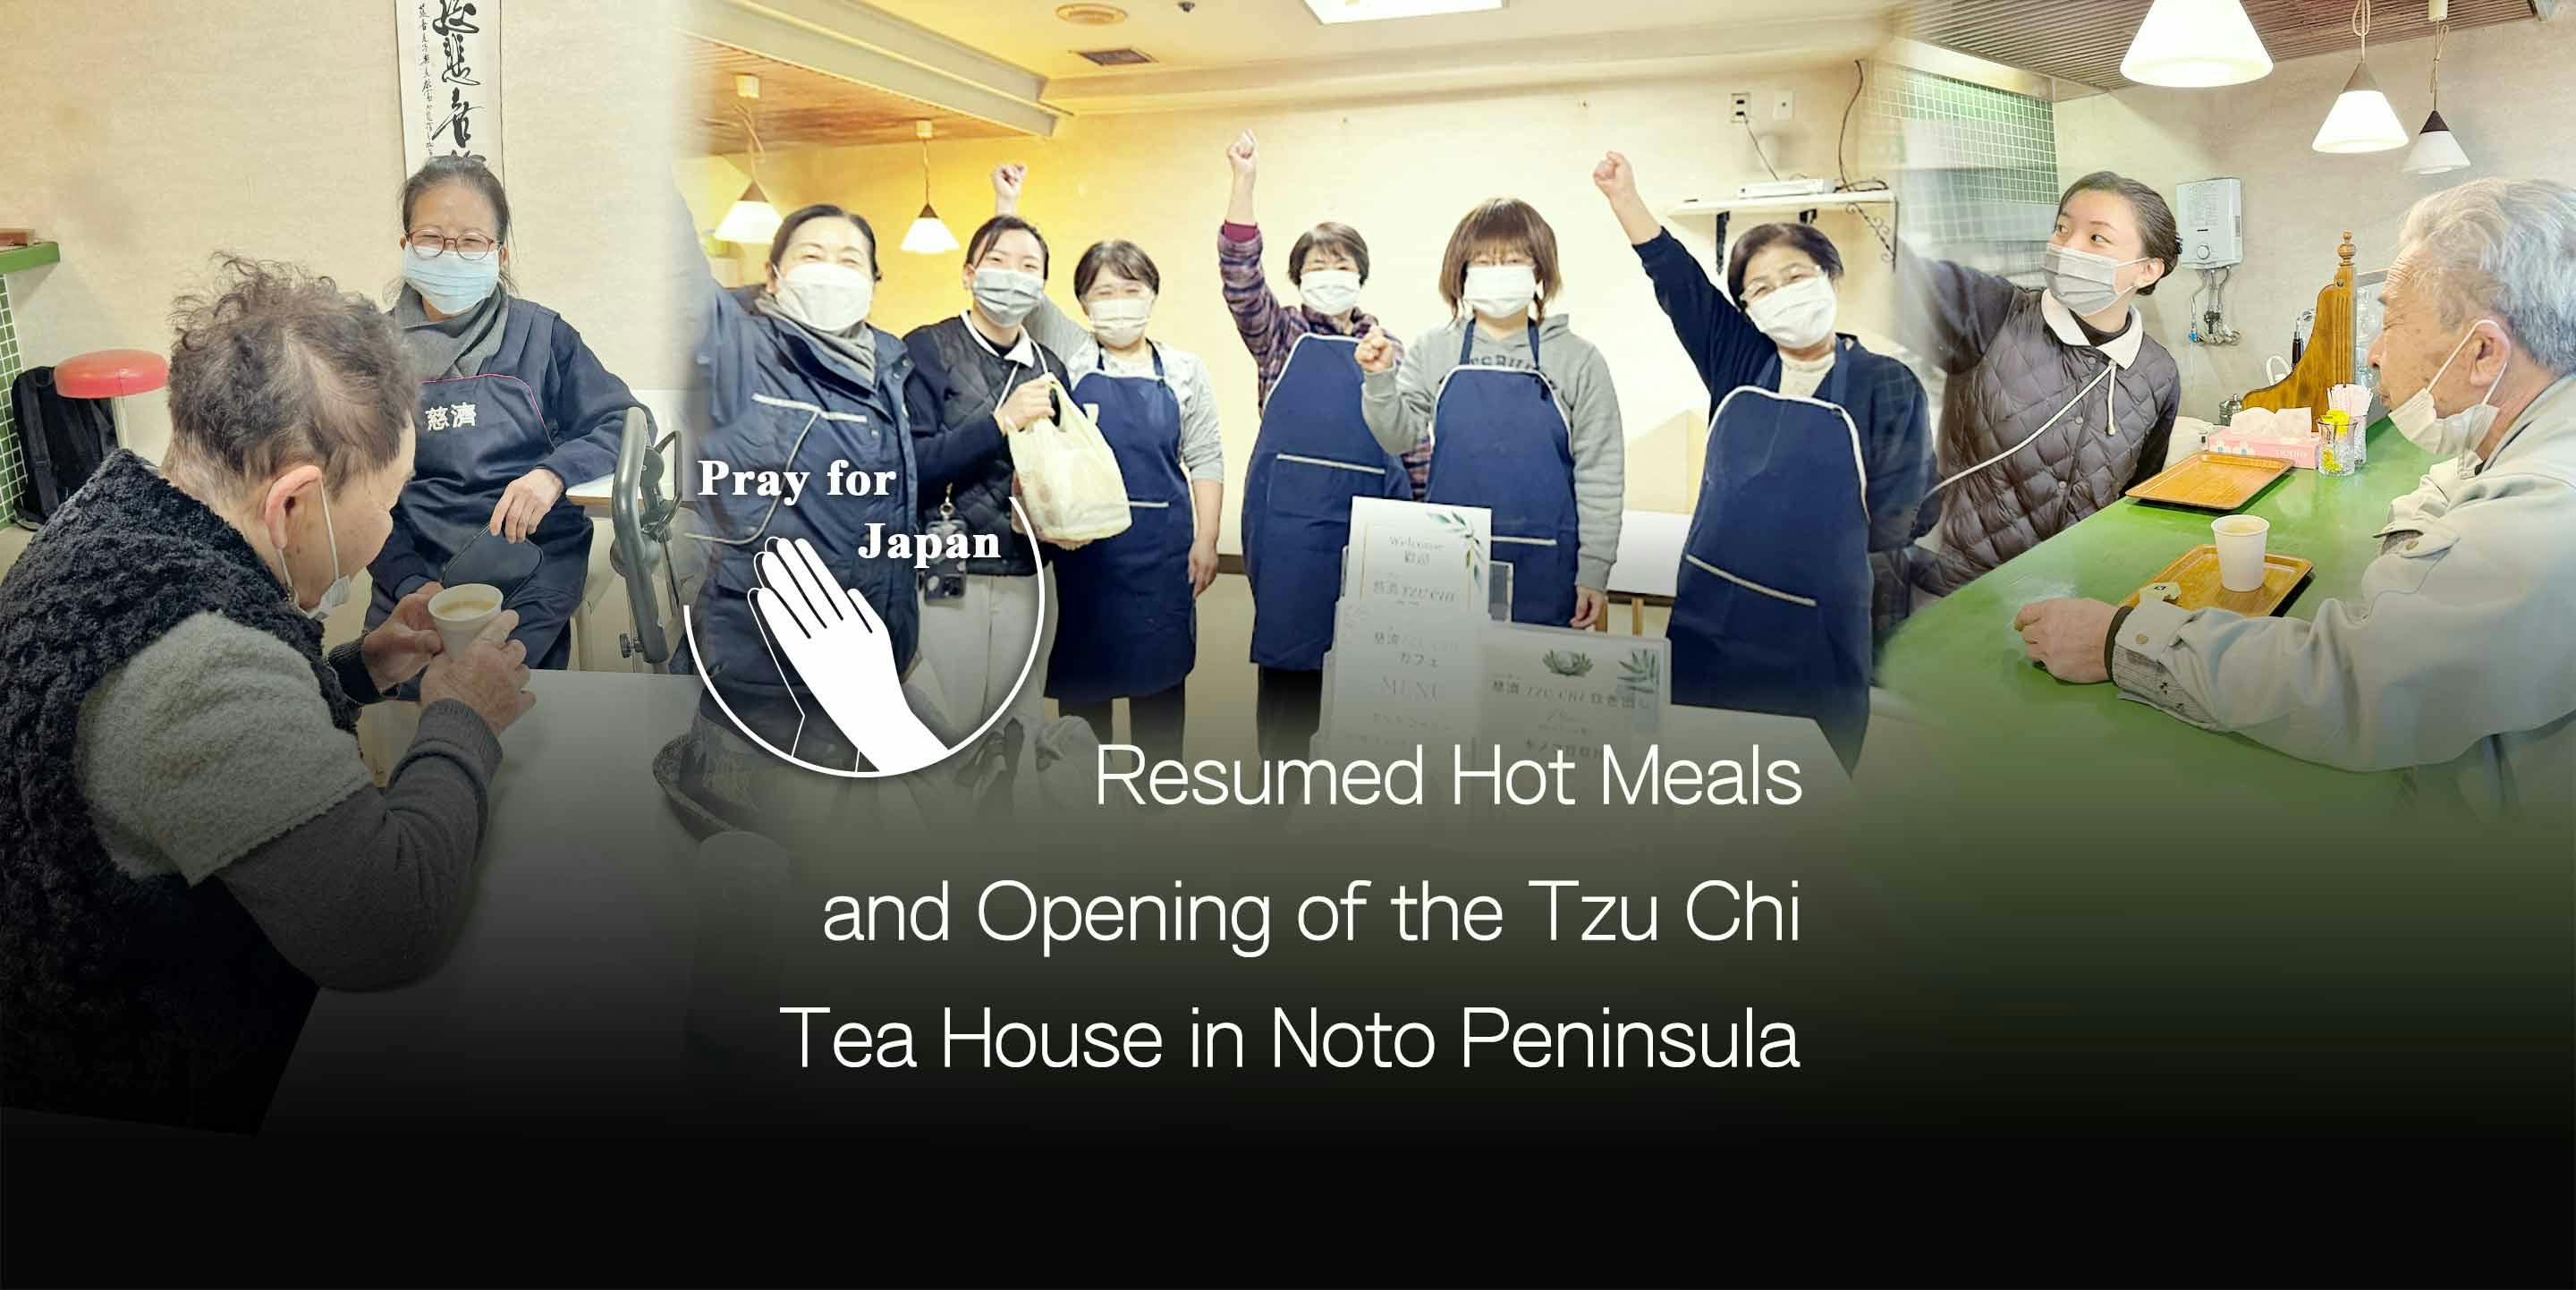 Resumed Hot Meals and Opening of the Tzu Chi Tea House in Noto Peninsula